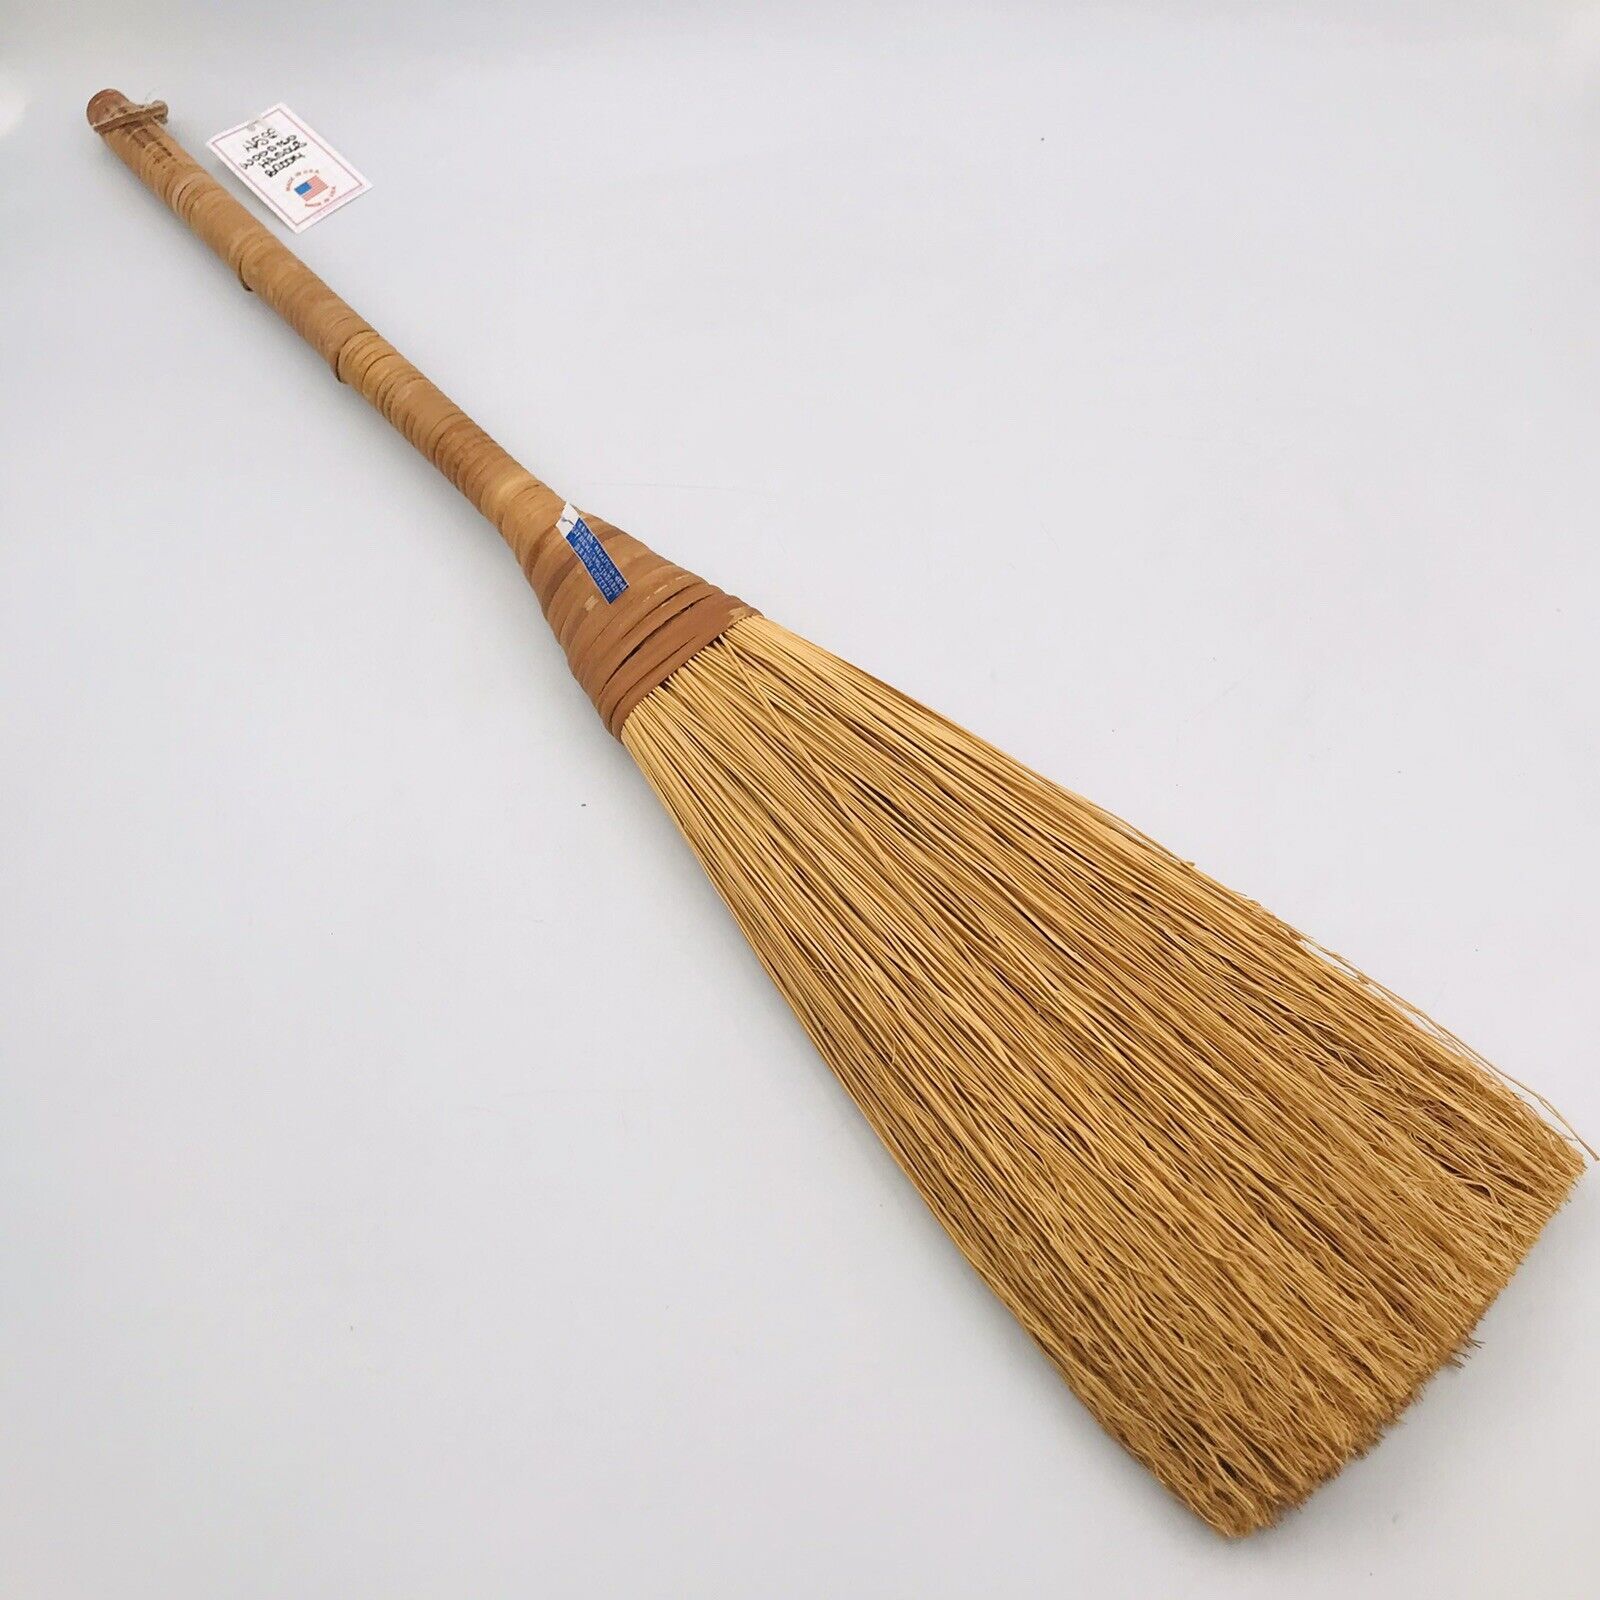 New Berea College Crafts Wrapped Wood Hearth Broom Sweep 31" Brown Straw 